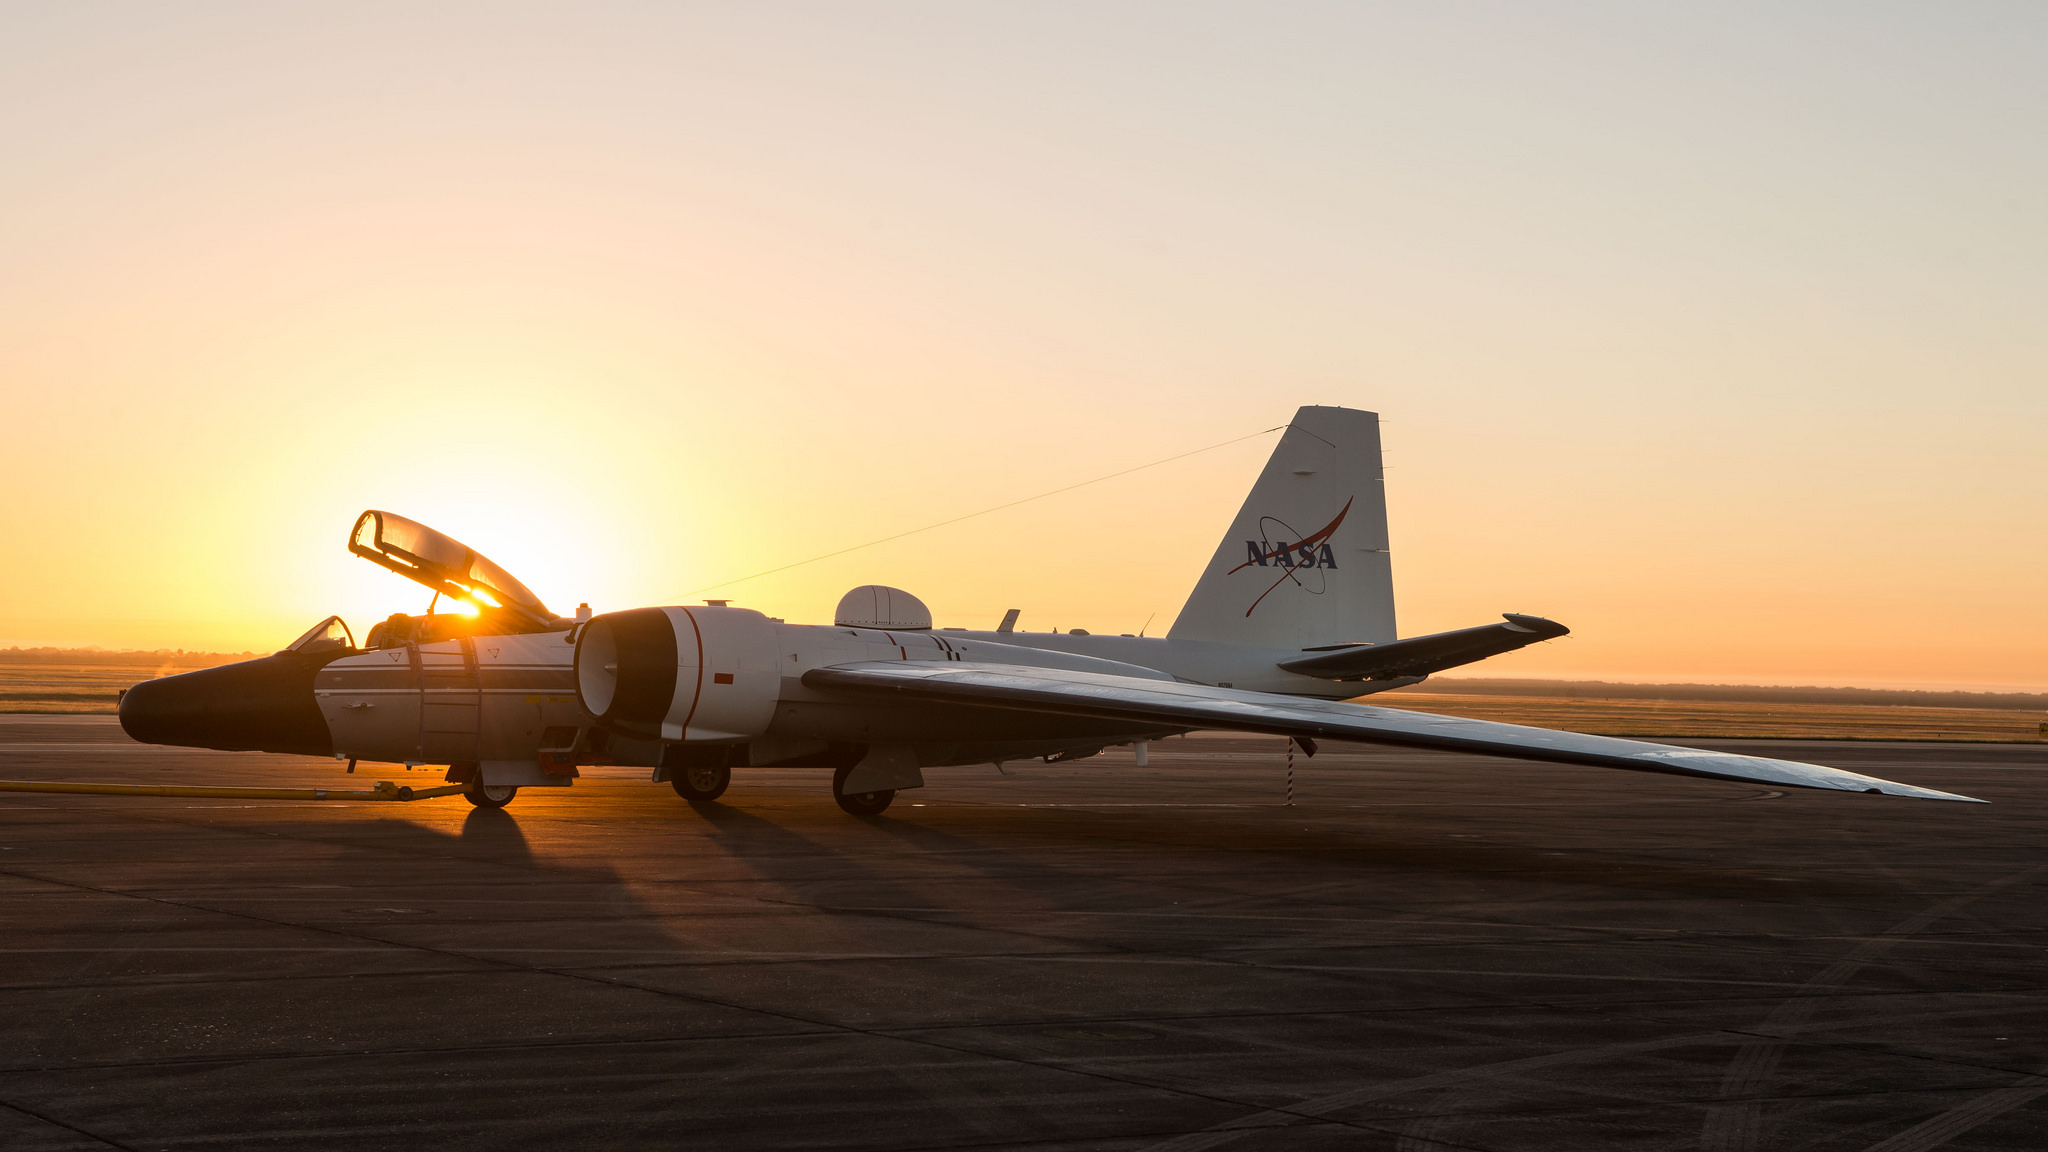 A Rare Glimpse Of NASA’s Prettiest Research Aeroplanes Flying Together